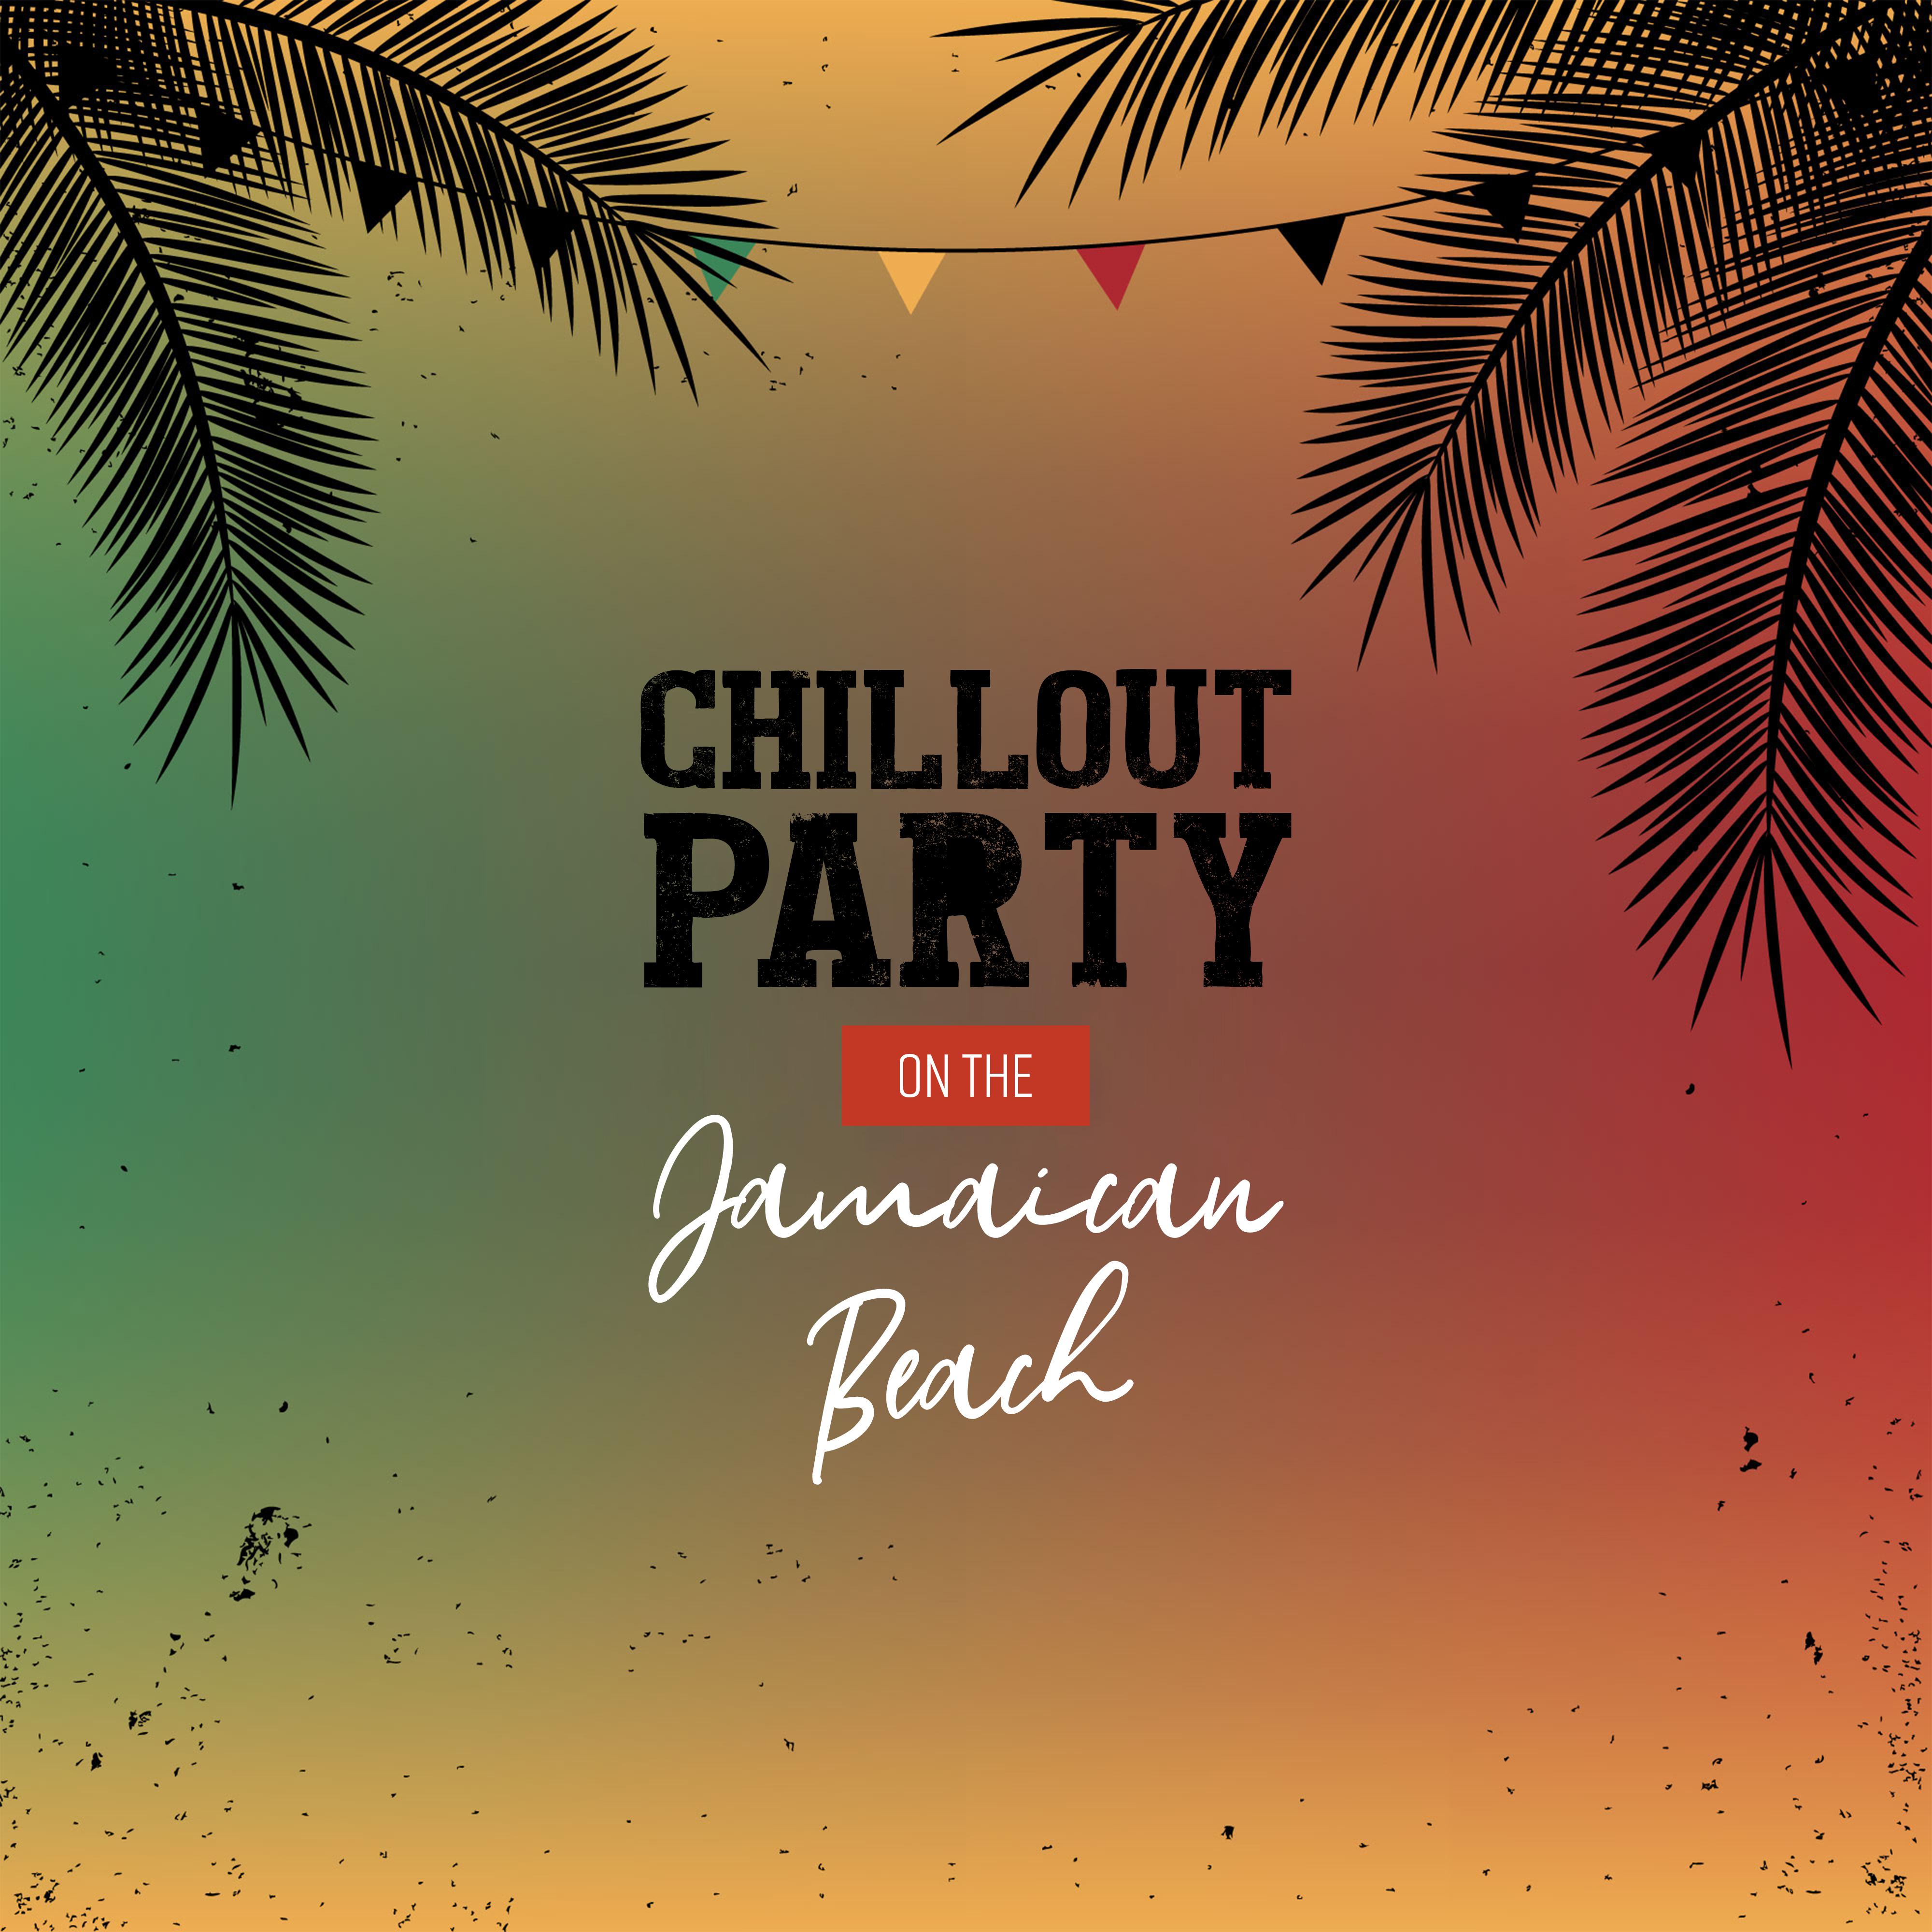 Chillout Party on the Jamaican Beach: Electronic Smooth Dancing Vibes